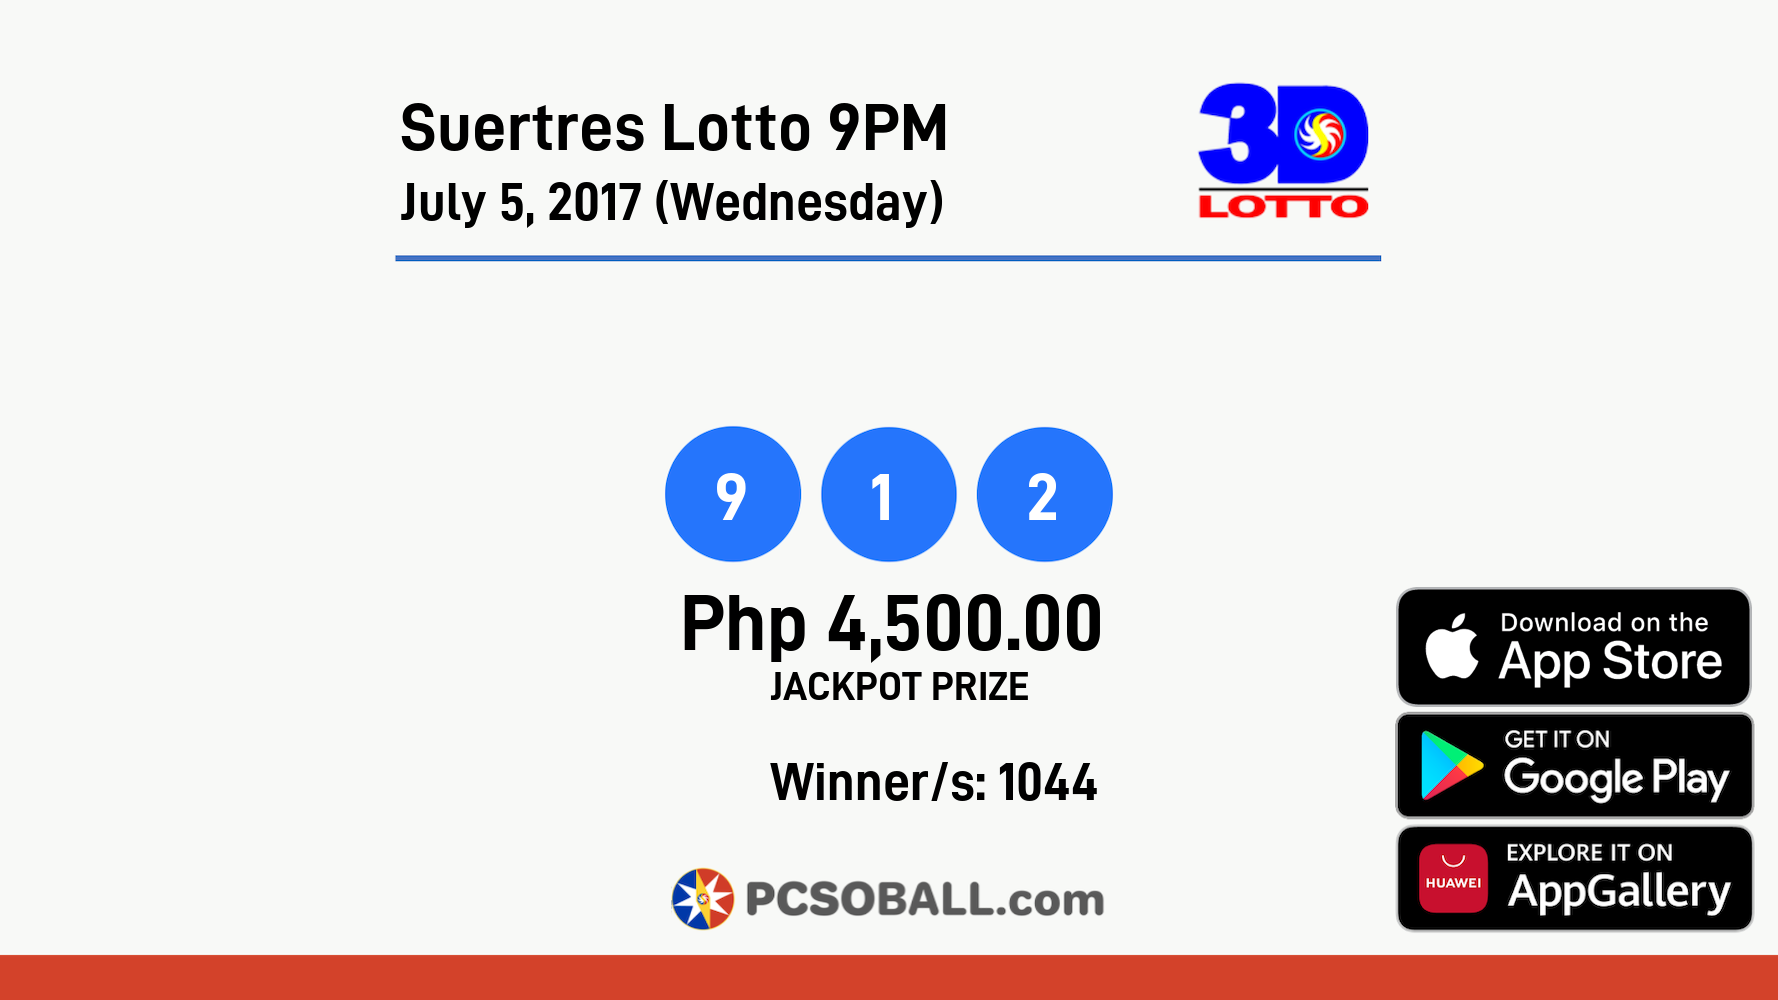 Suertres Lotto 9PM July 5, 2017 (Wednesday) Result